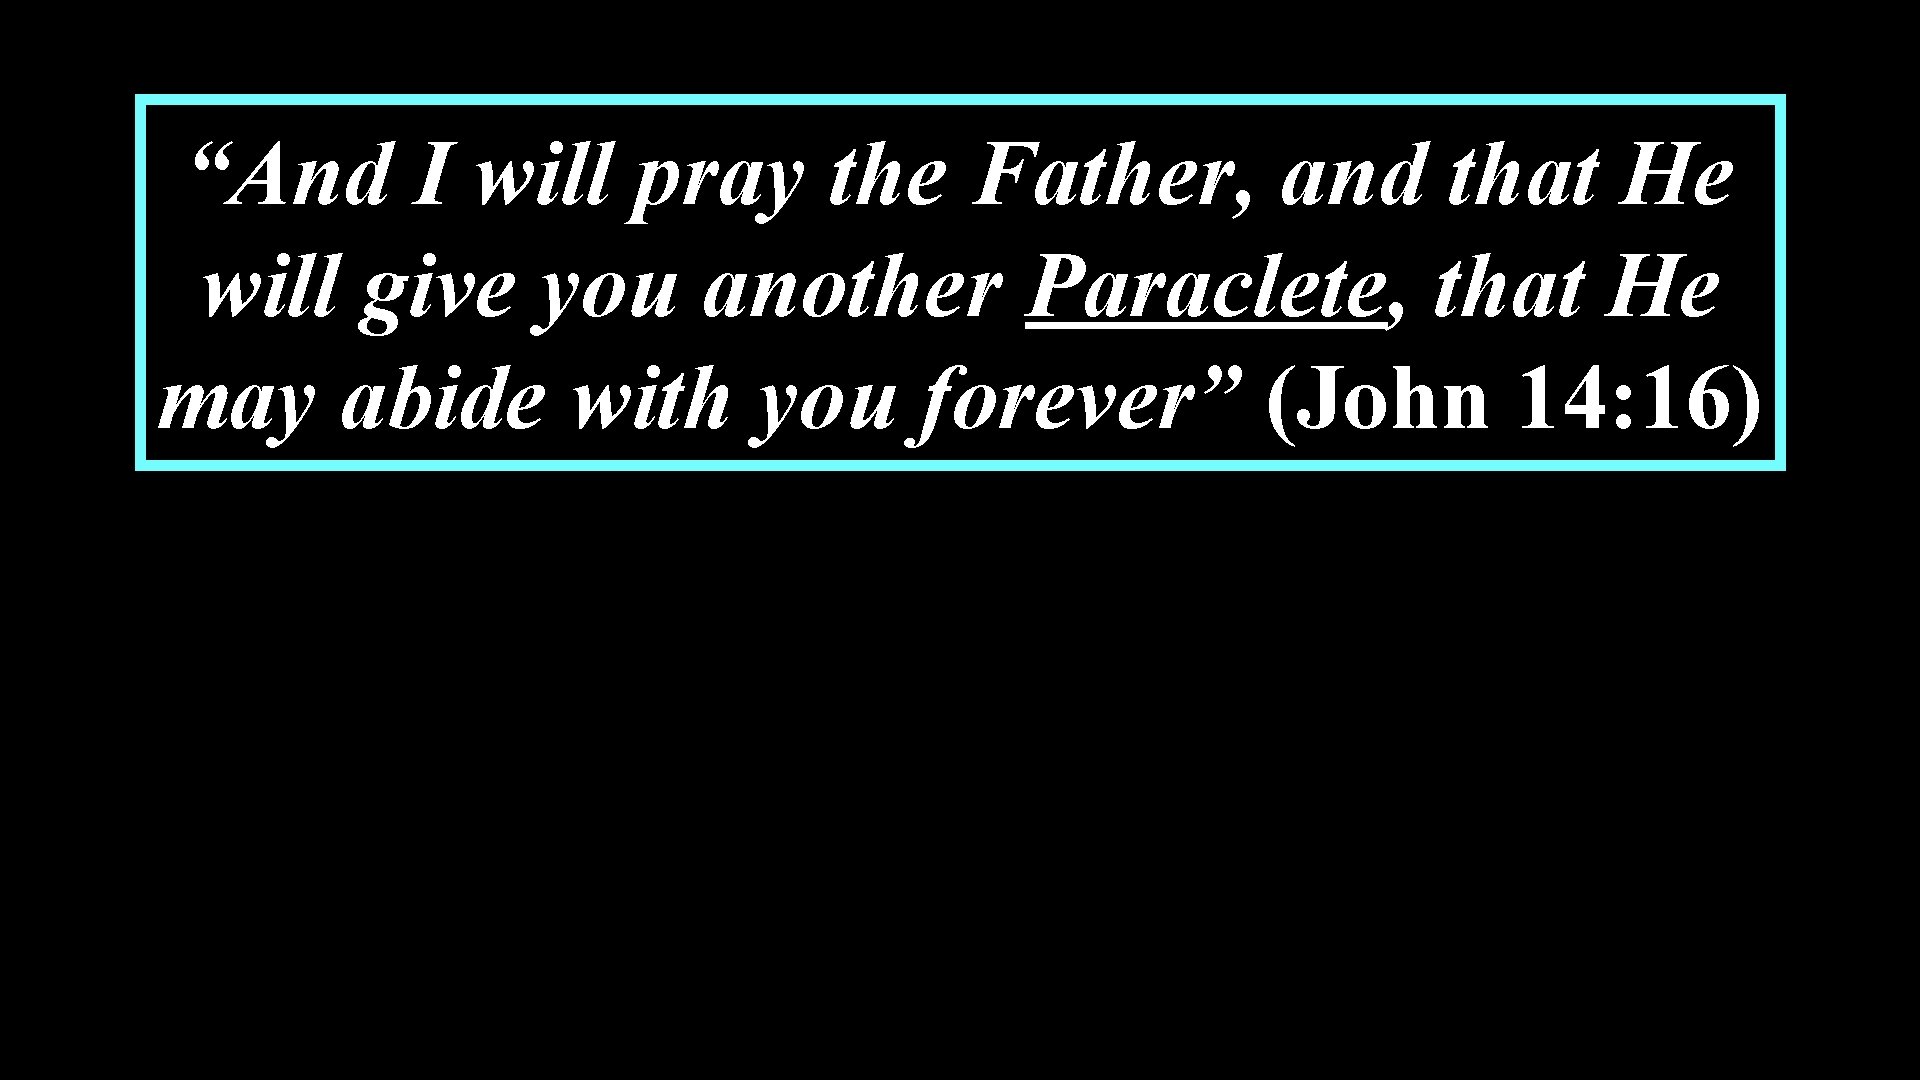 “And I will pray the Father, and that He will give you another Paraclete,